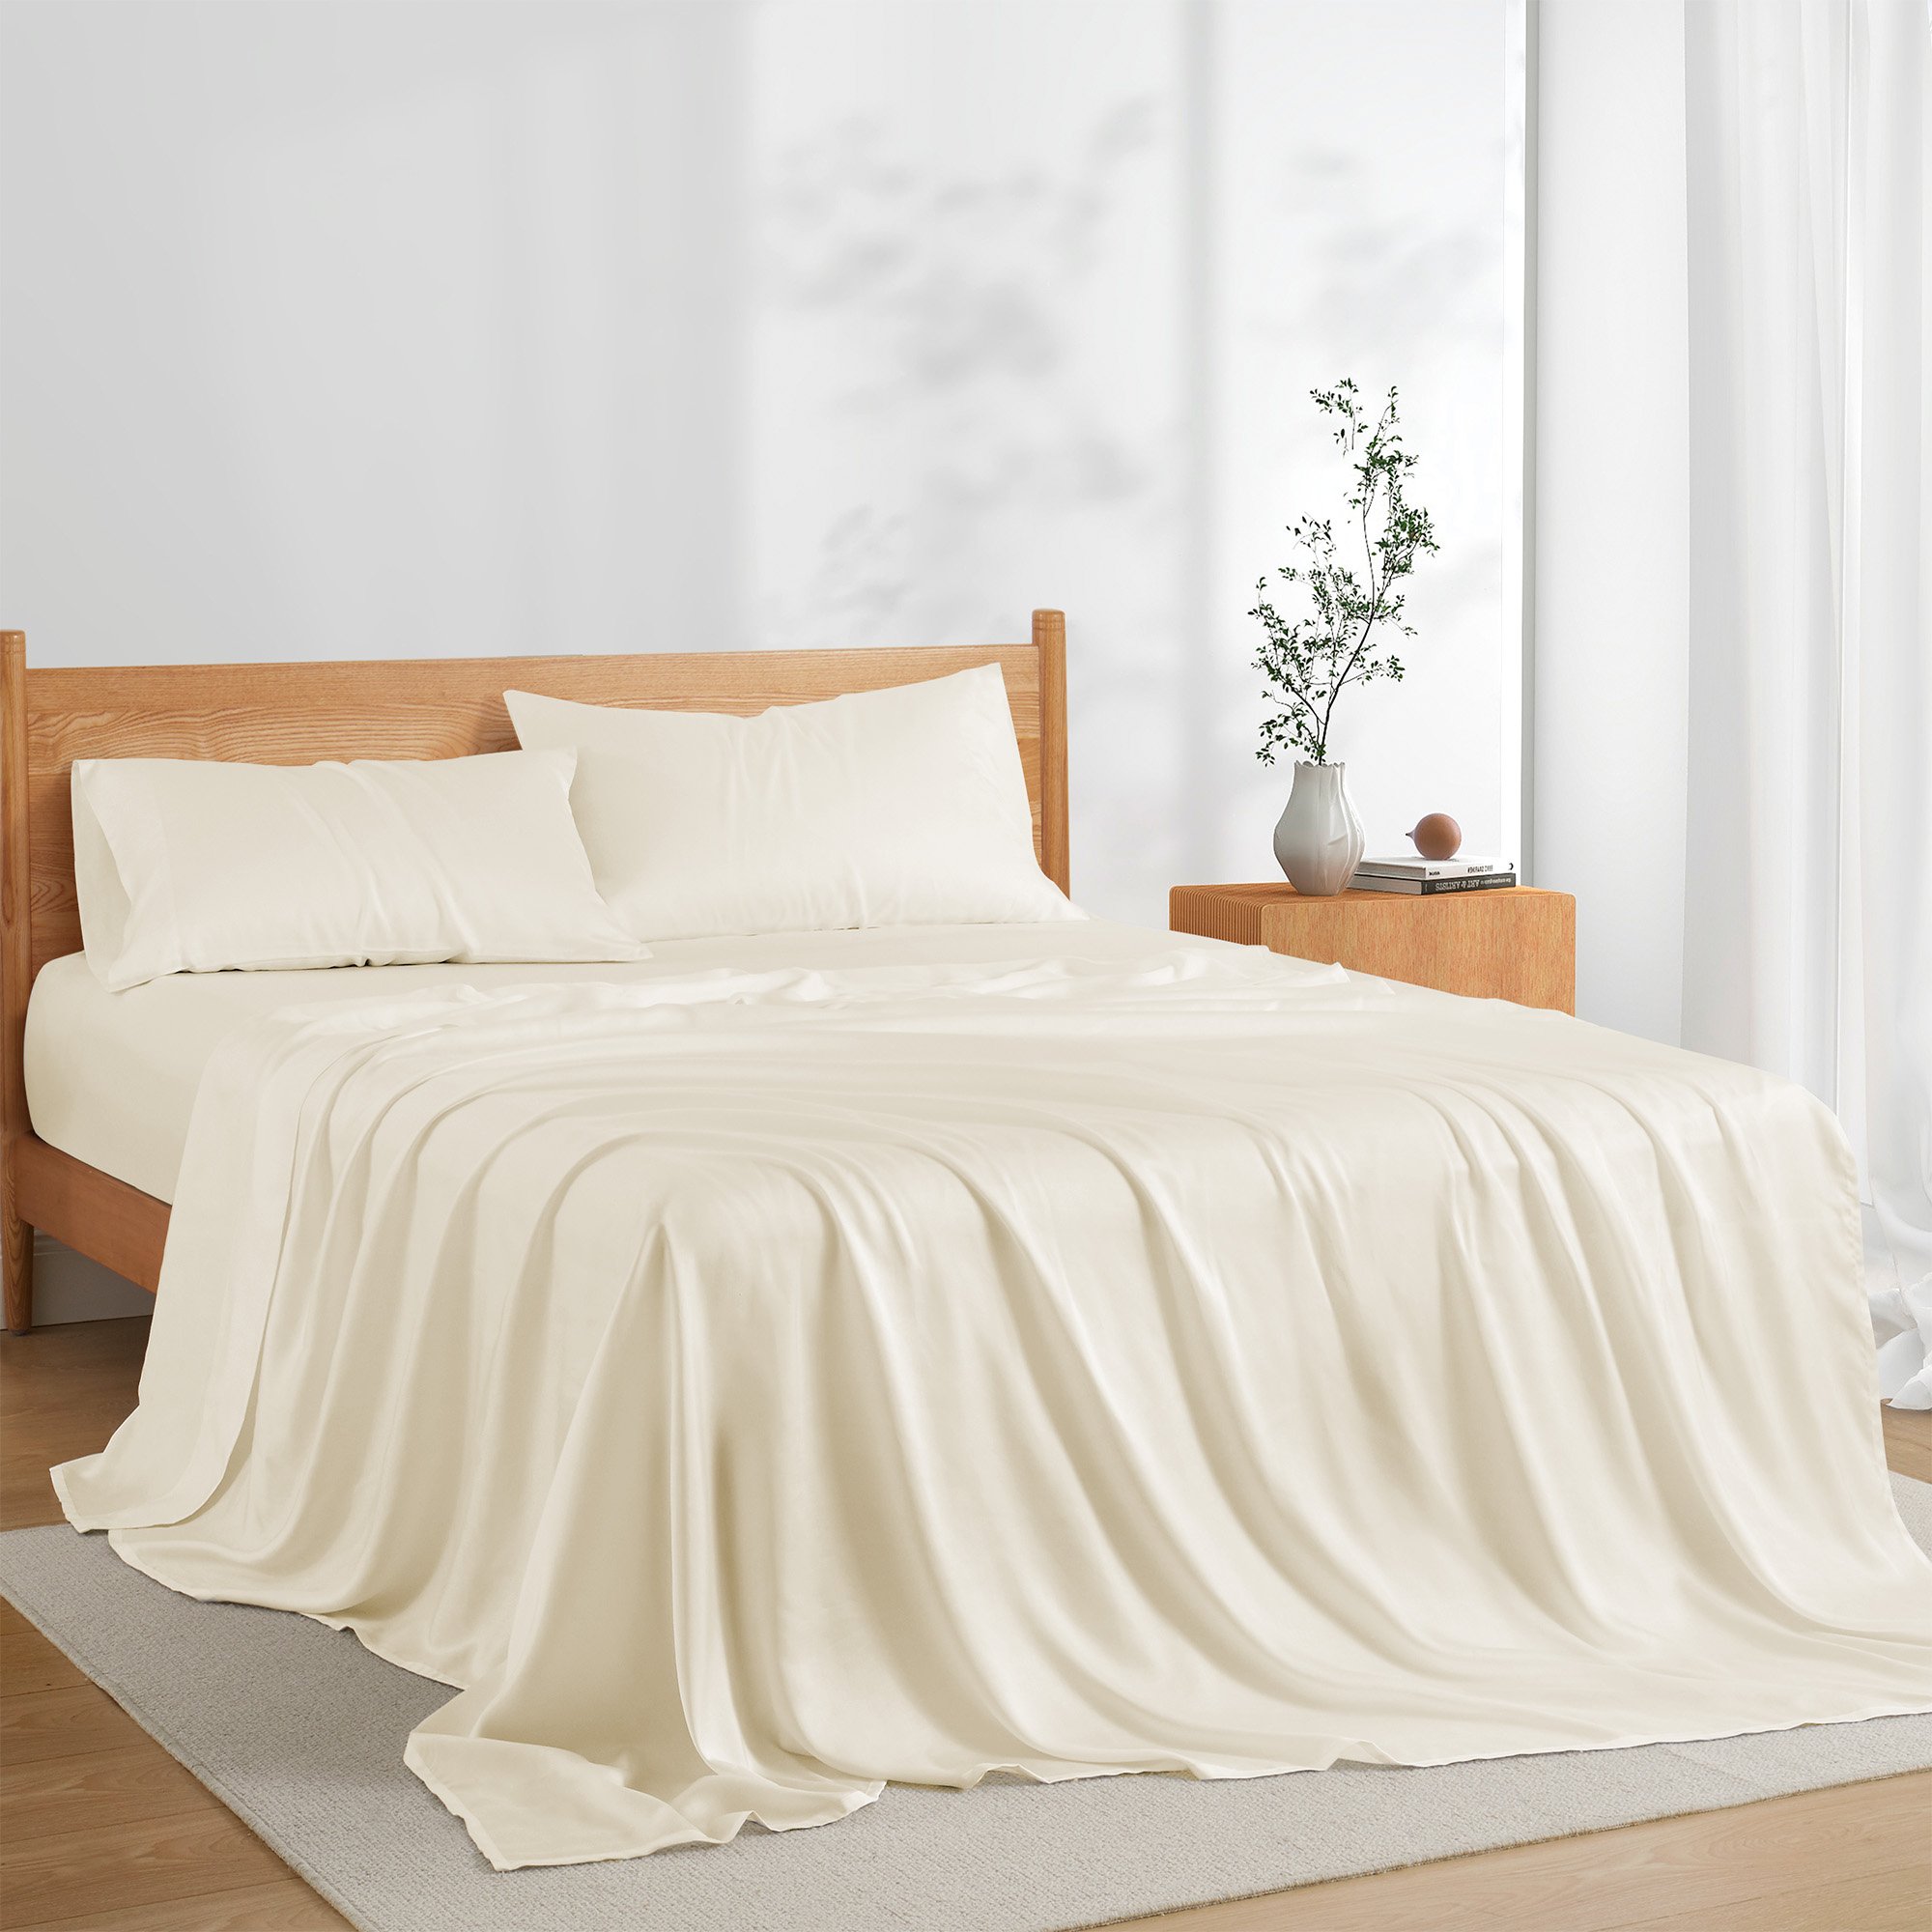 Naturally Cooling, Soft, And Breathable Tencel Lyocell 4Pc Sheets Set - King Size